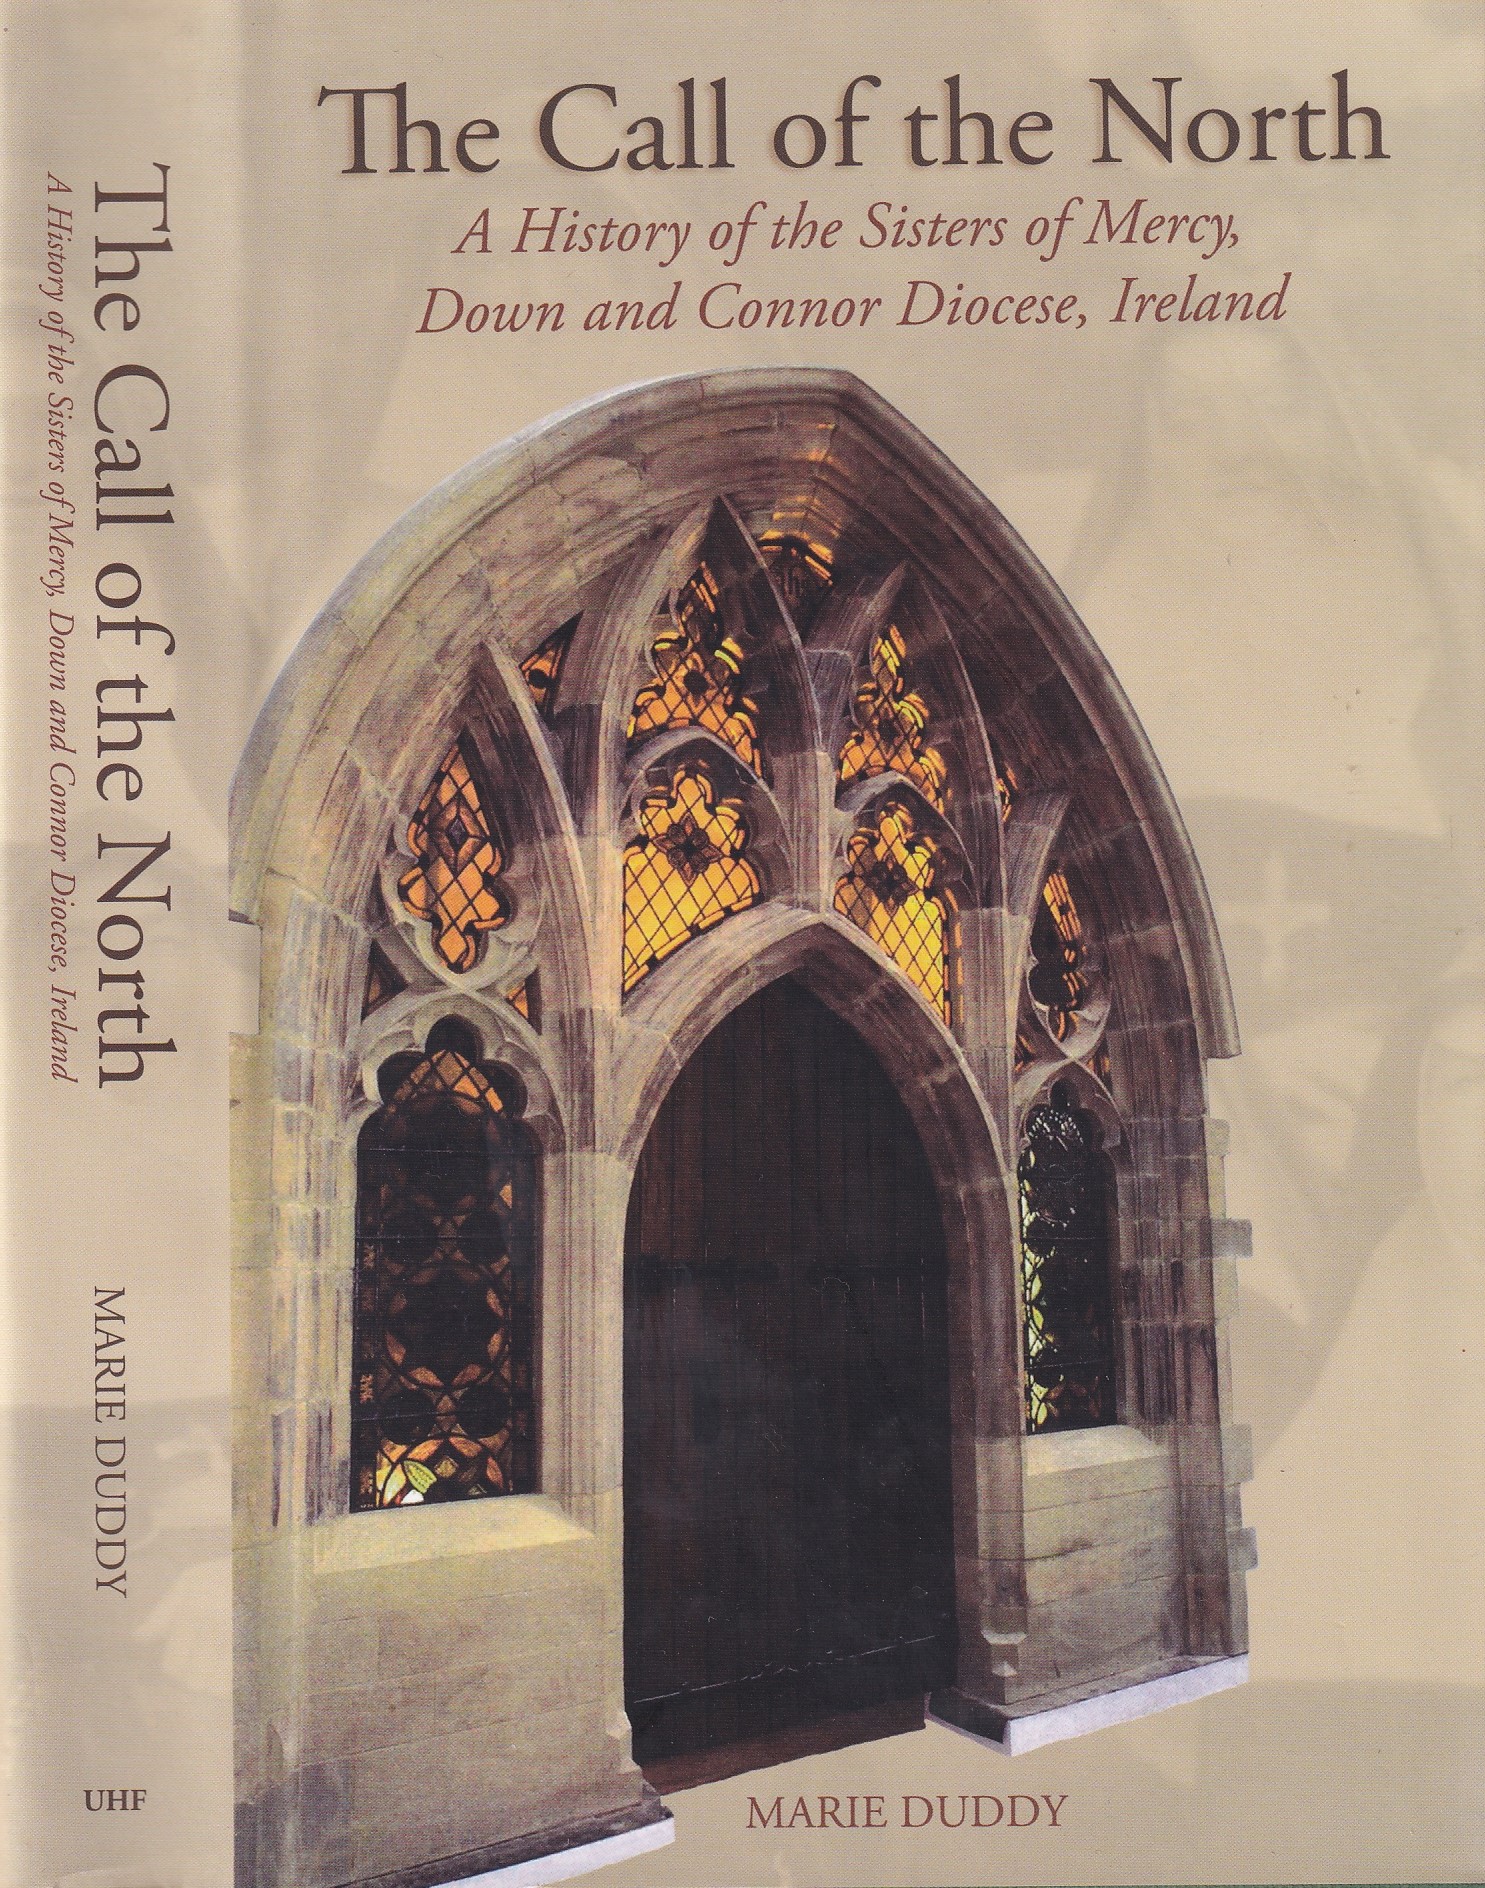 The Call of the North: A History of the Sisters of Mercy, Down and Connor Diocese, Ireland by Marie Duddy